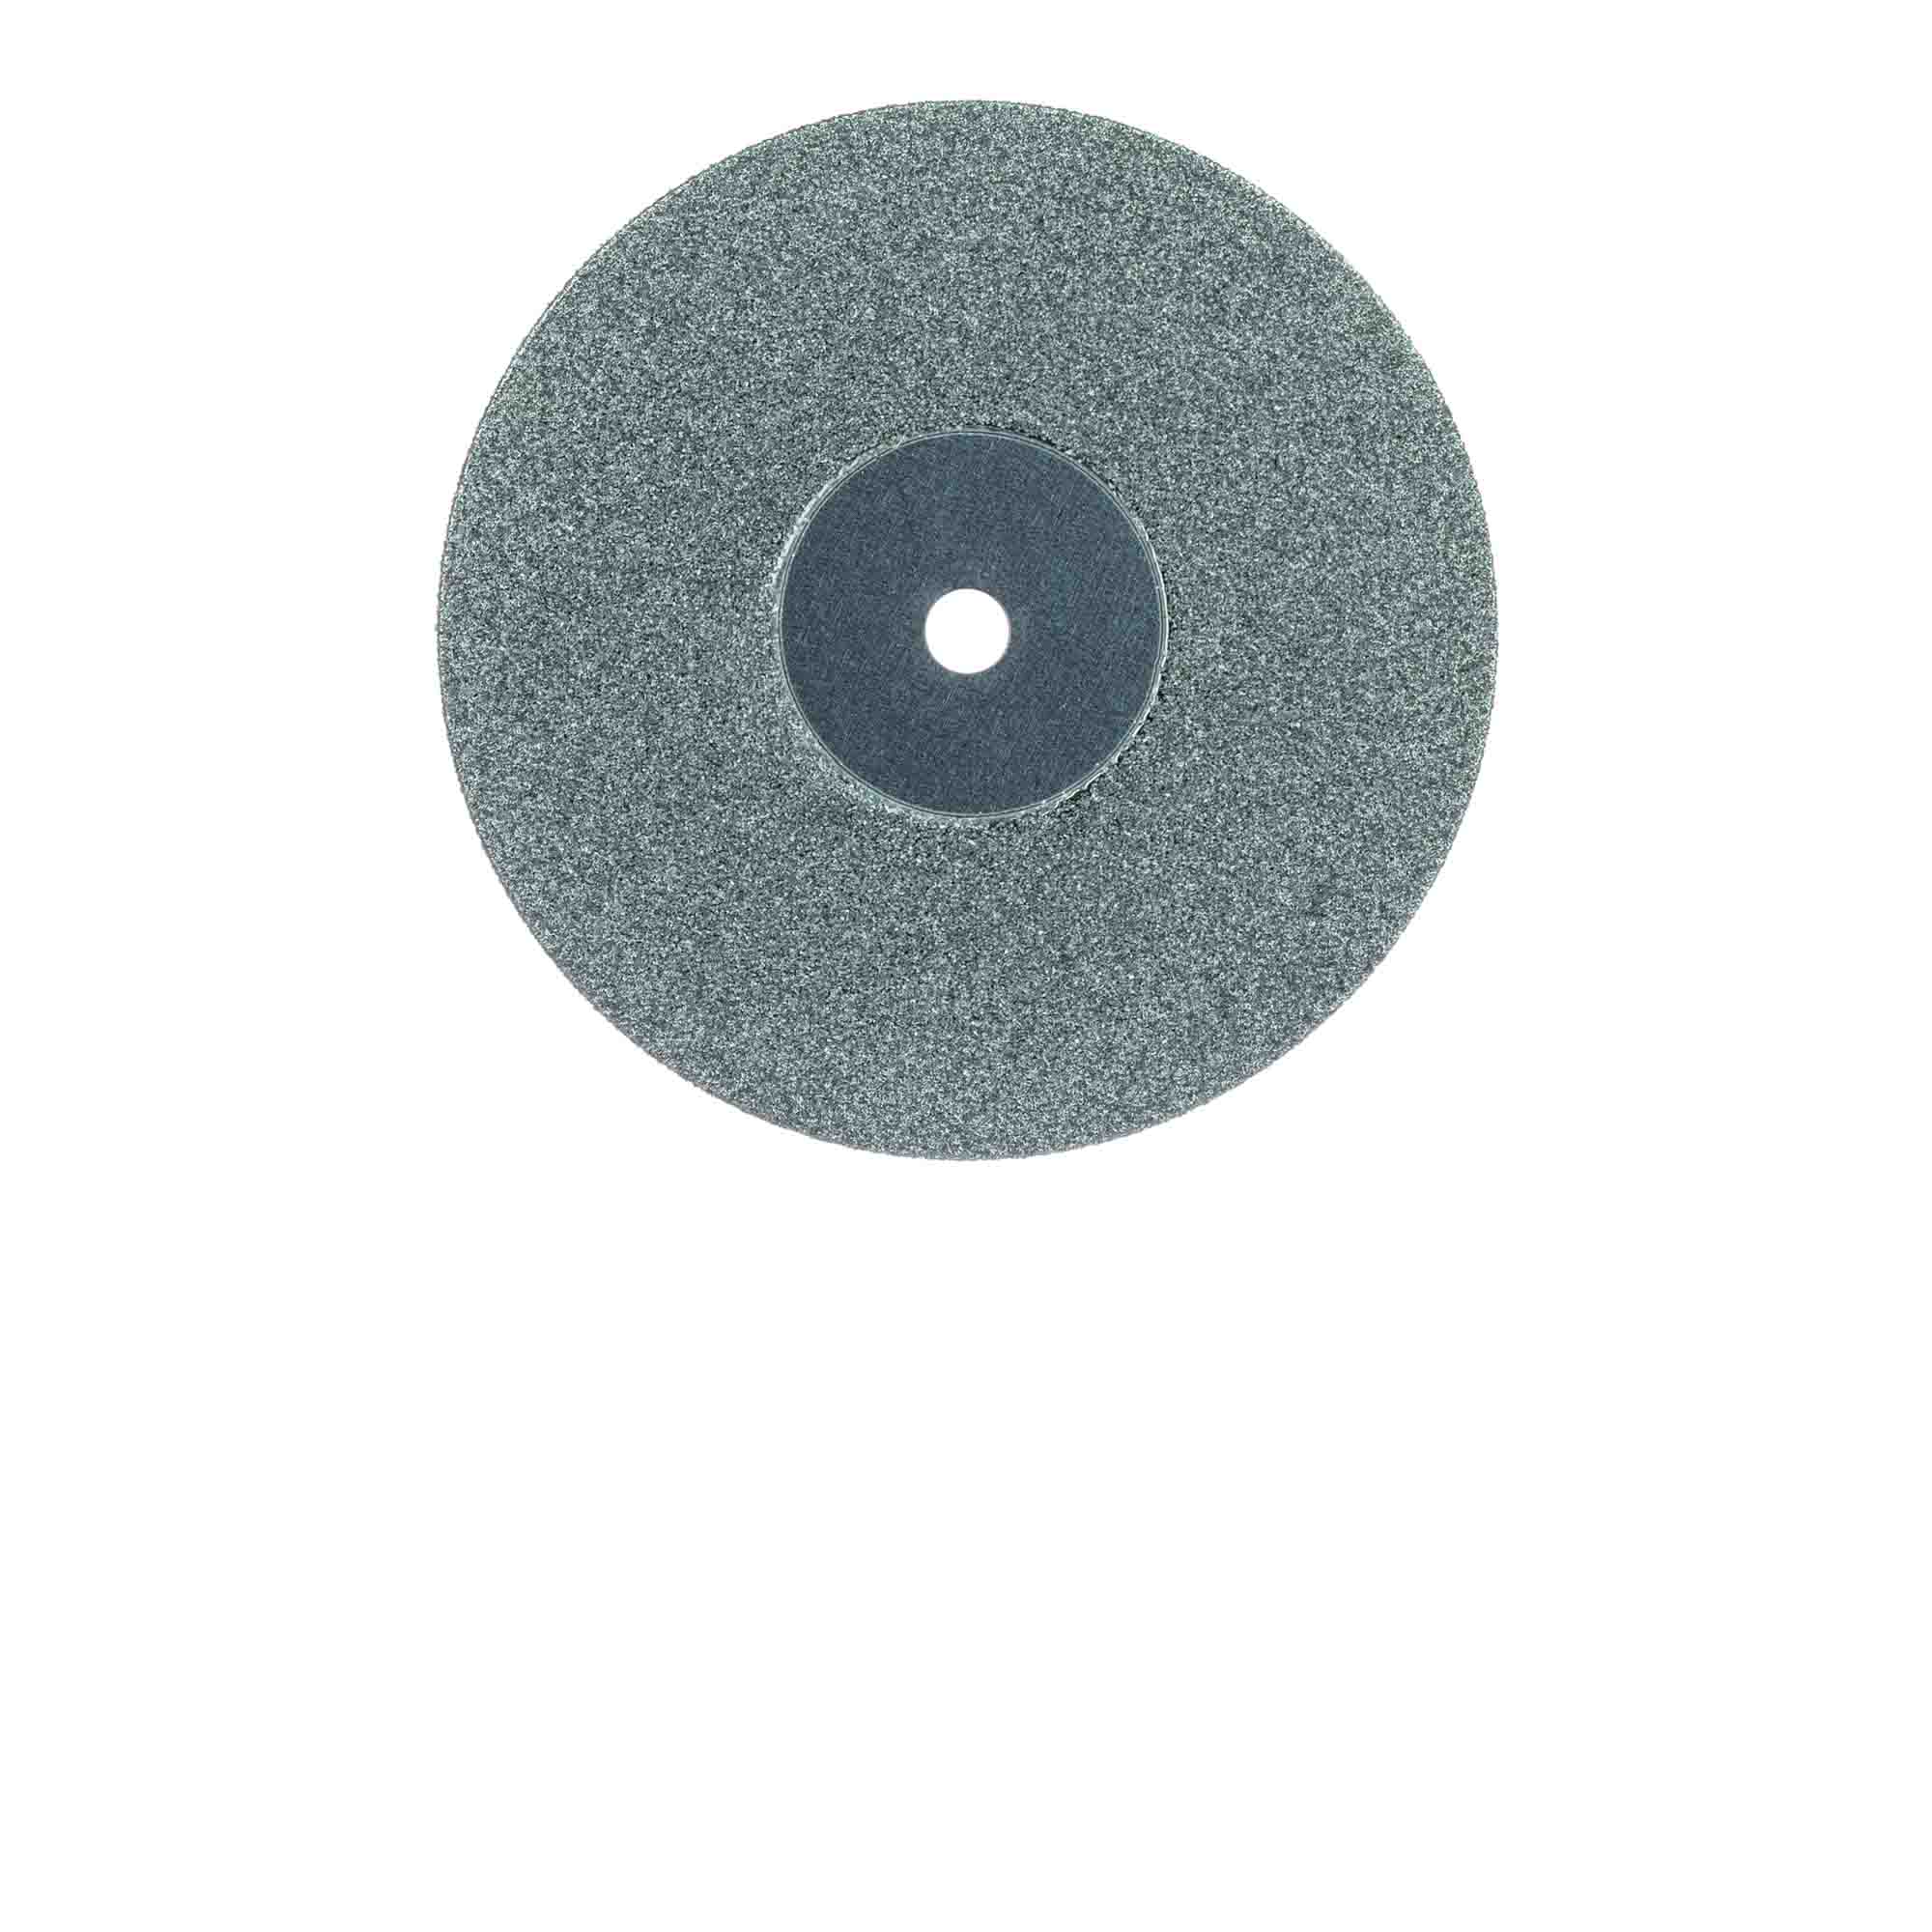 916D-190-UNM Diamond Disc, Double Sided, 0.5mm thick, 19mm Diameter, UNM